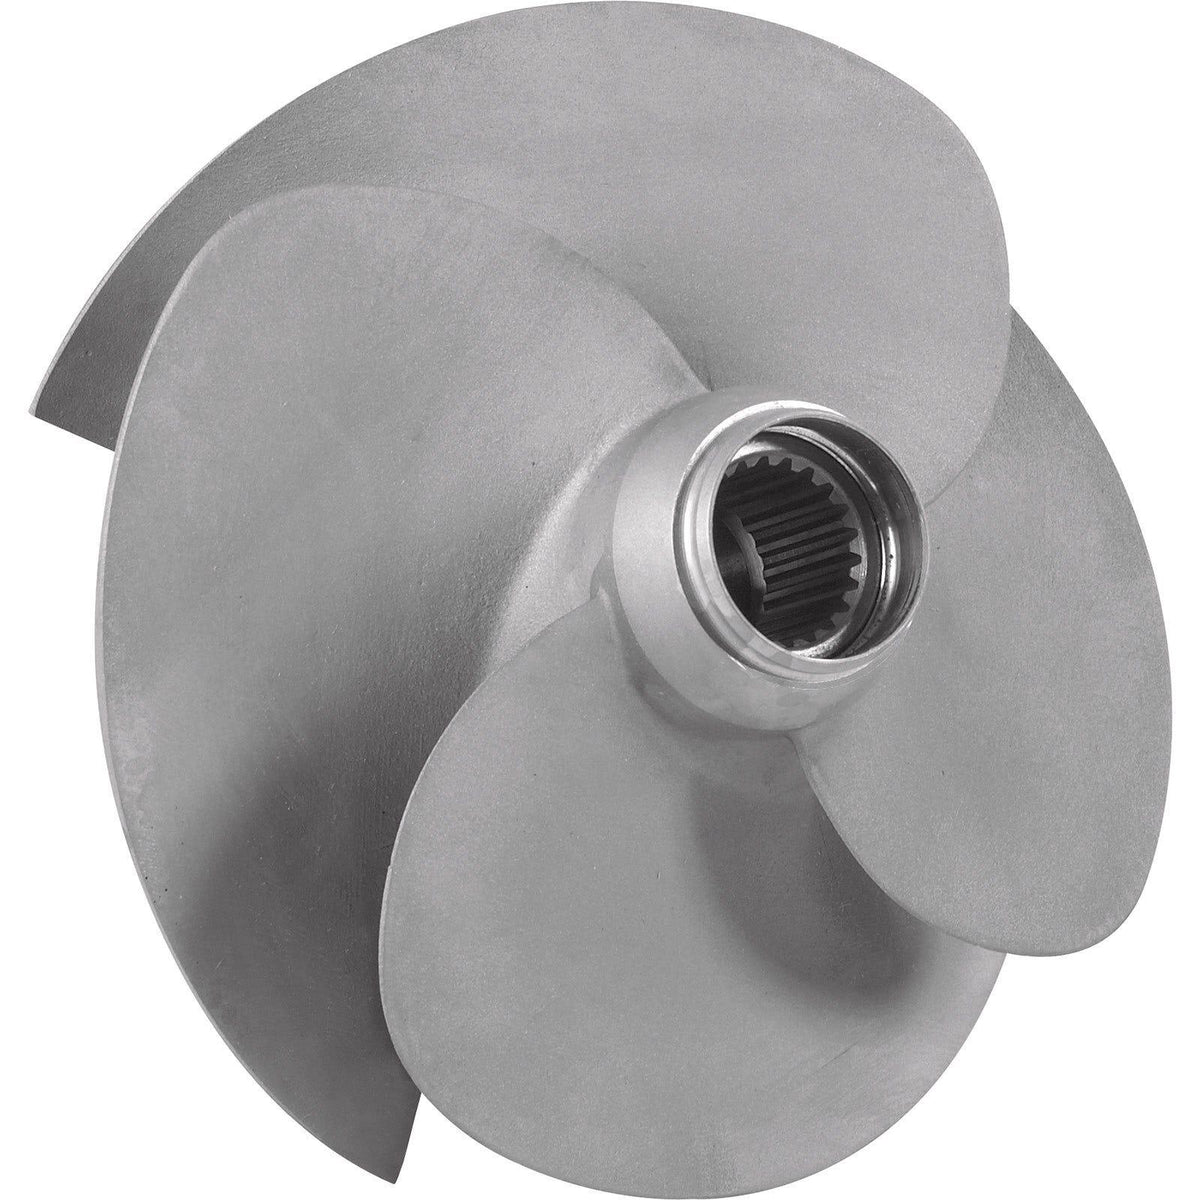 GTI 90 and GTI SE 90 (2017-2019), GTS 90 (2017-2018) Impeller